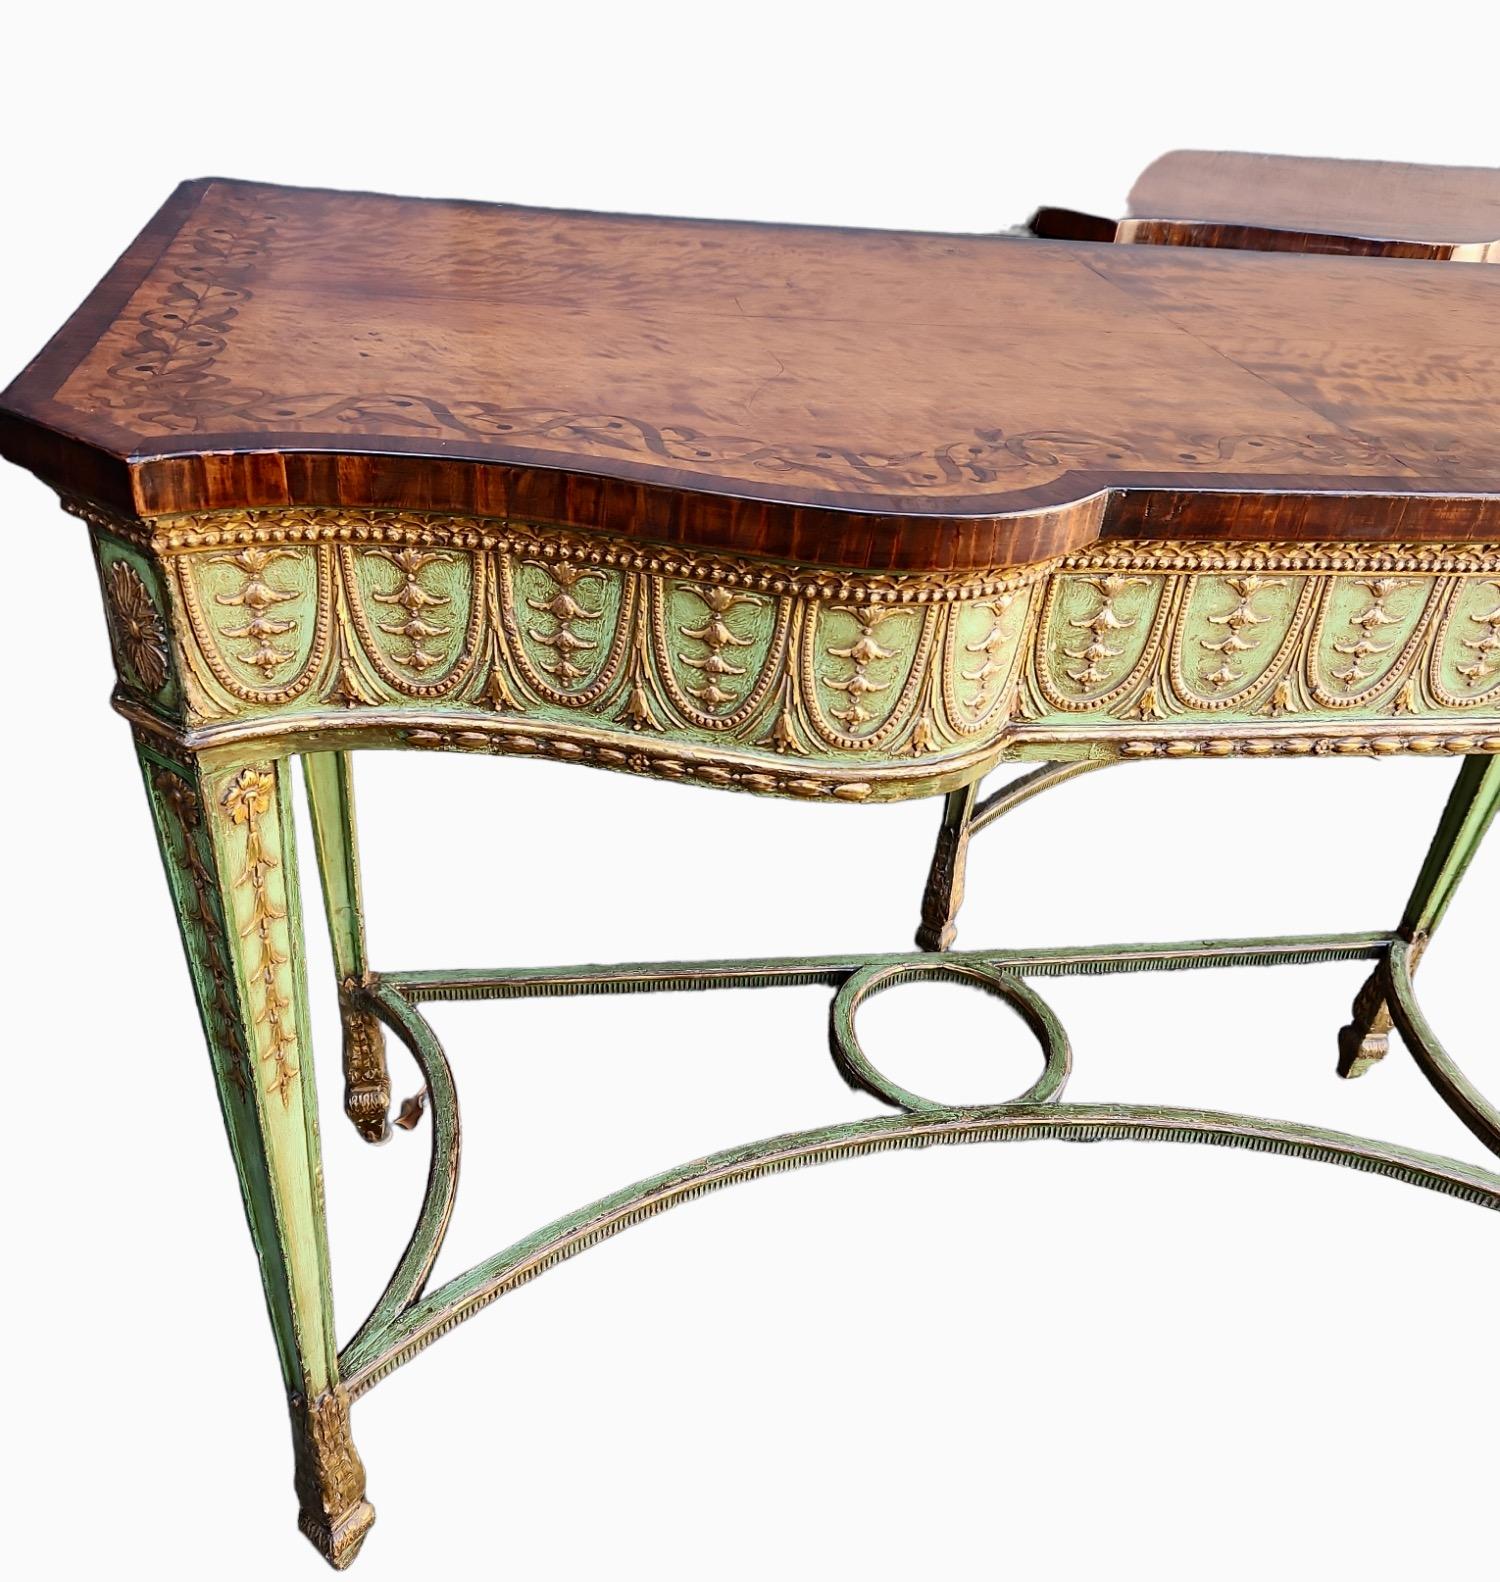 Fine pair of English consoles. Painted background with finely-carved gilt wood details. Tops of consoles are satinwood with finely inlaid motif.